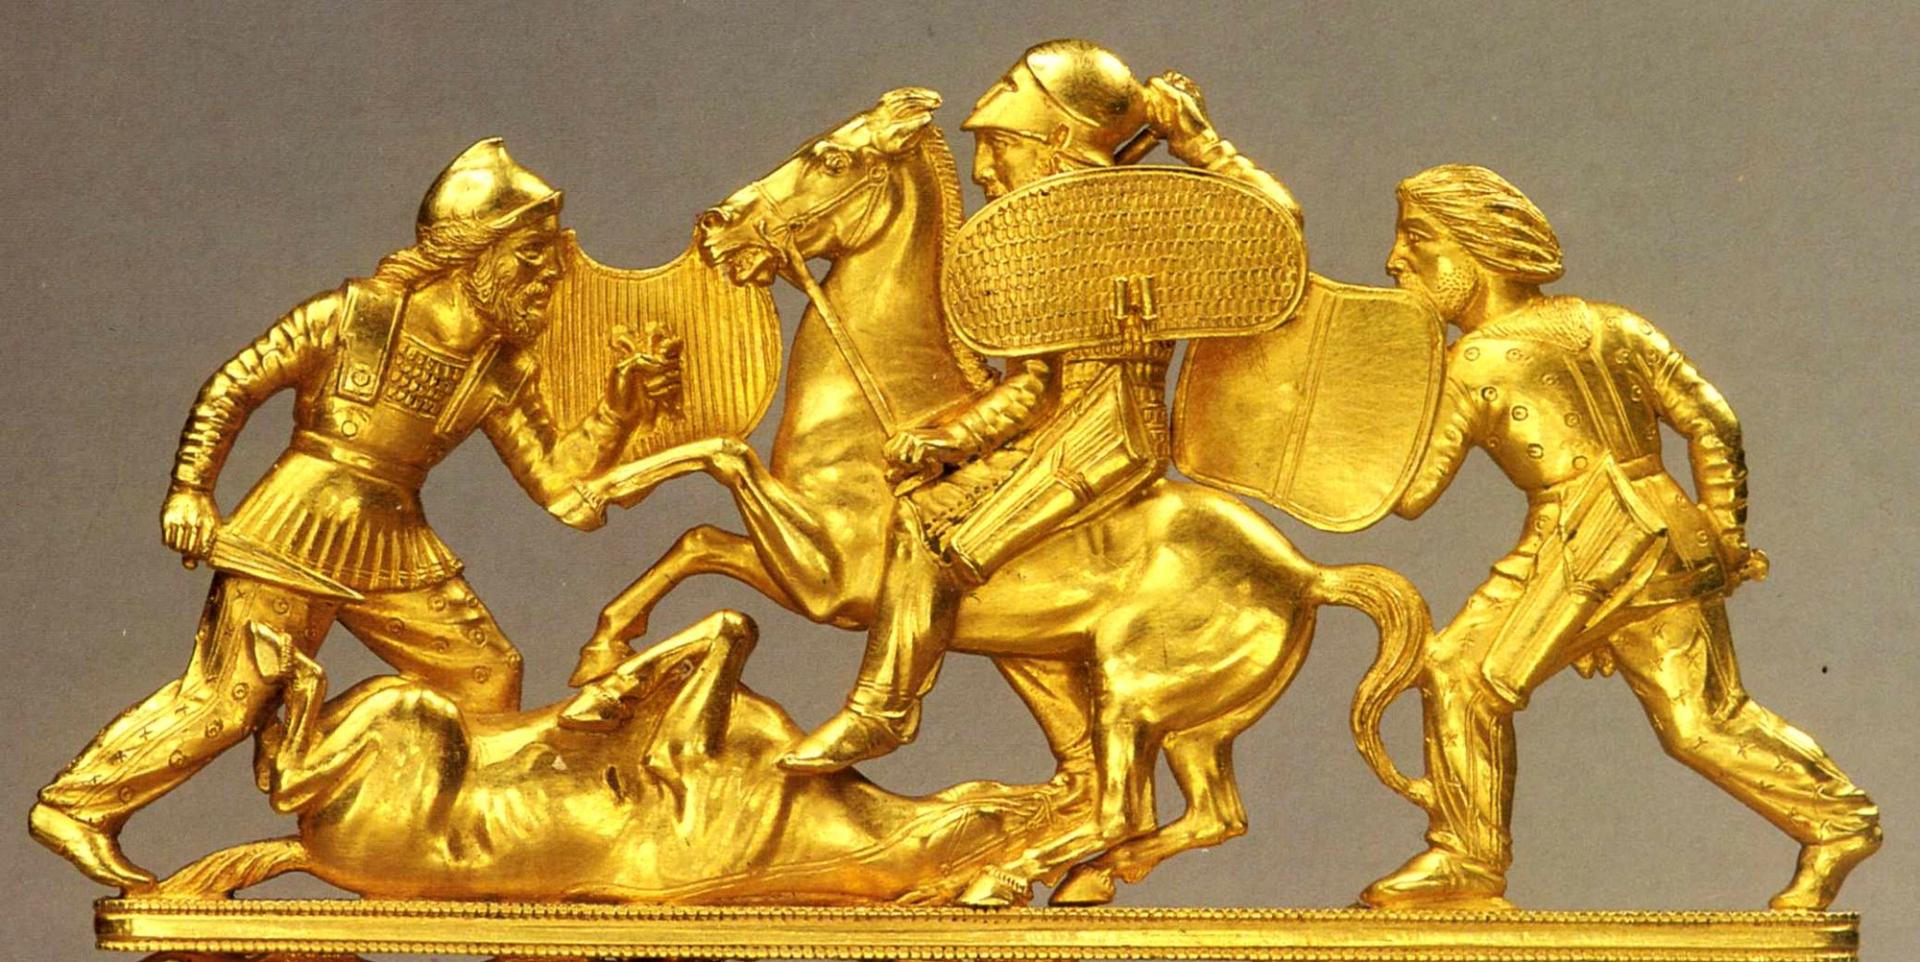 Scythian gold comb with the image of a battle scene, from the Solokha kurgan (430-390 BC)